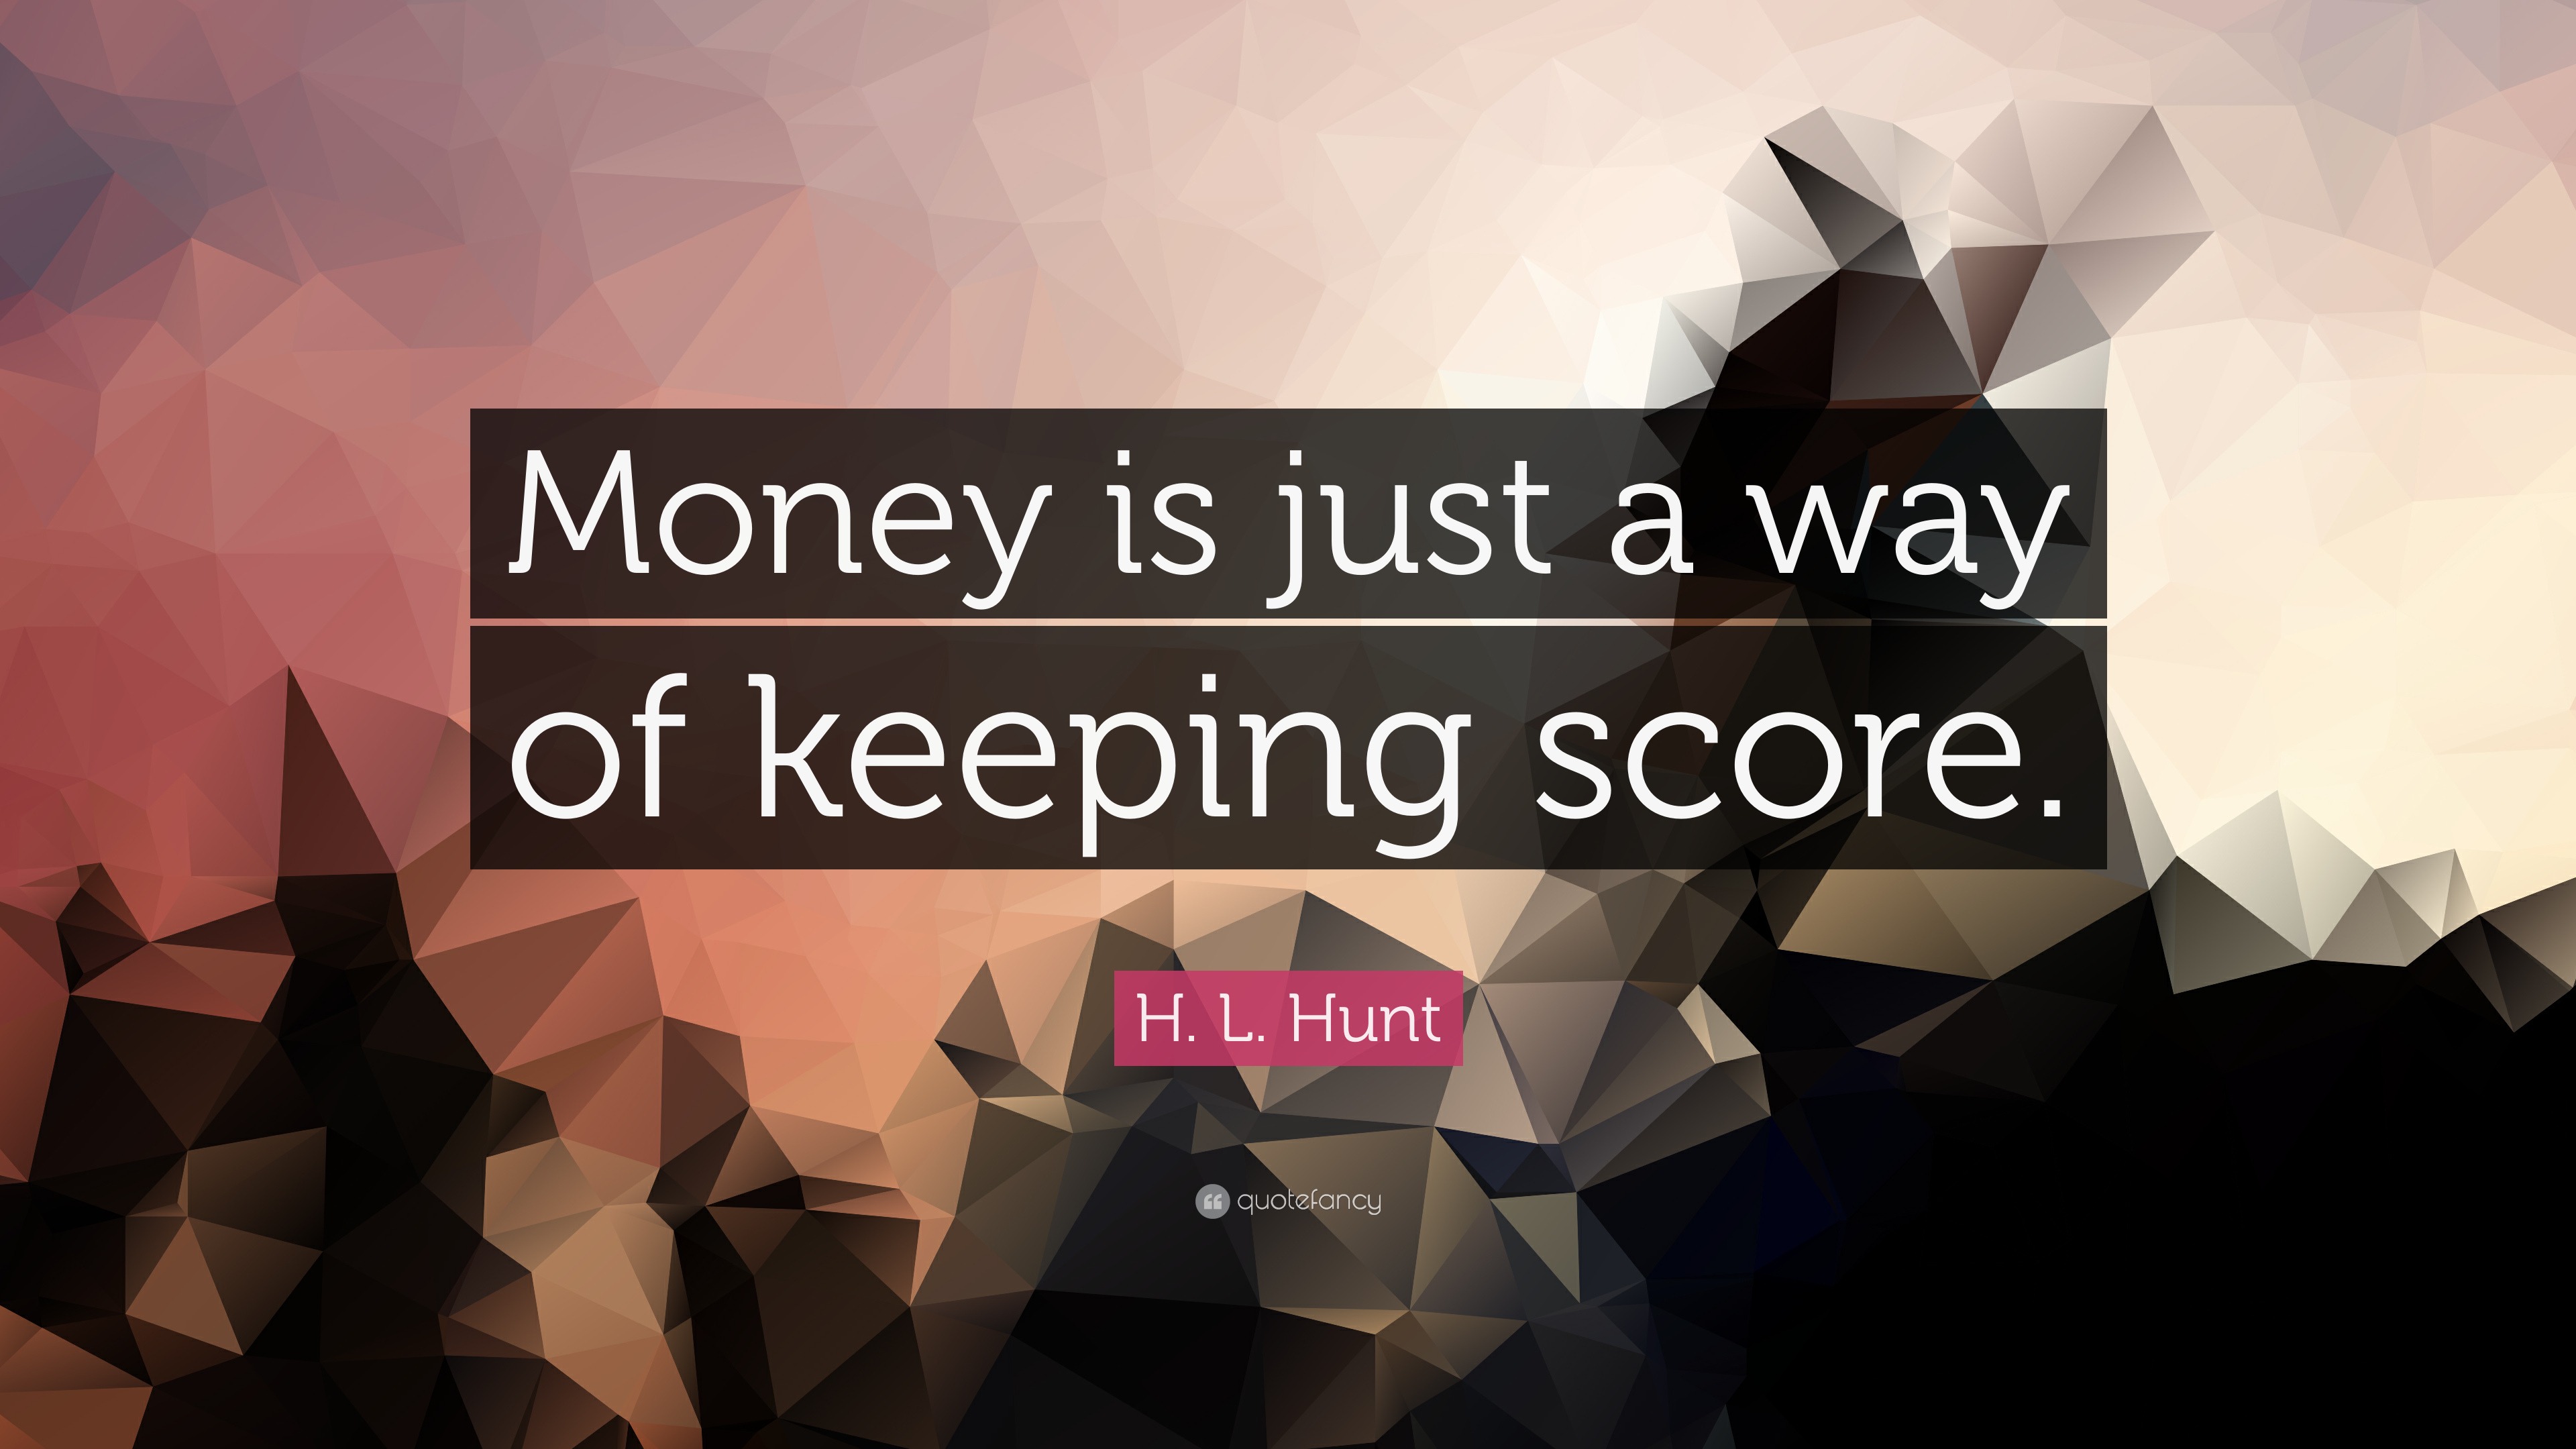 H. L. Hunt Quote: “Money is just a way of keeping score.”